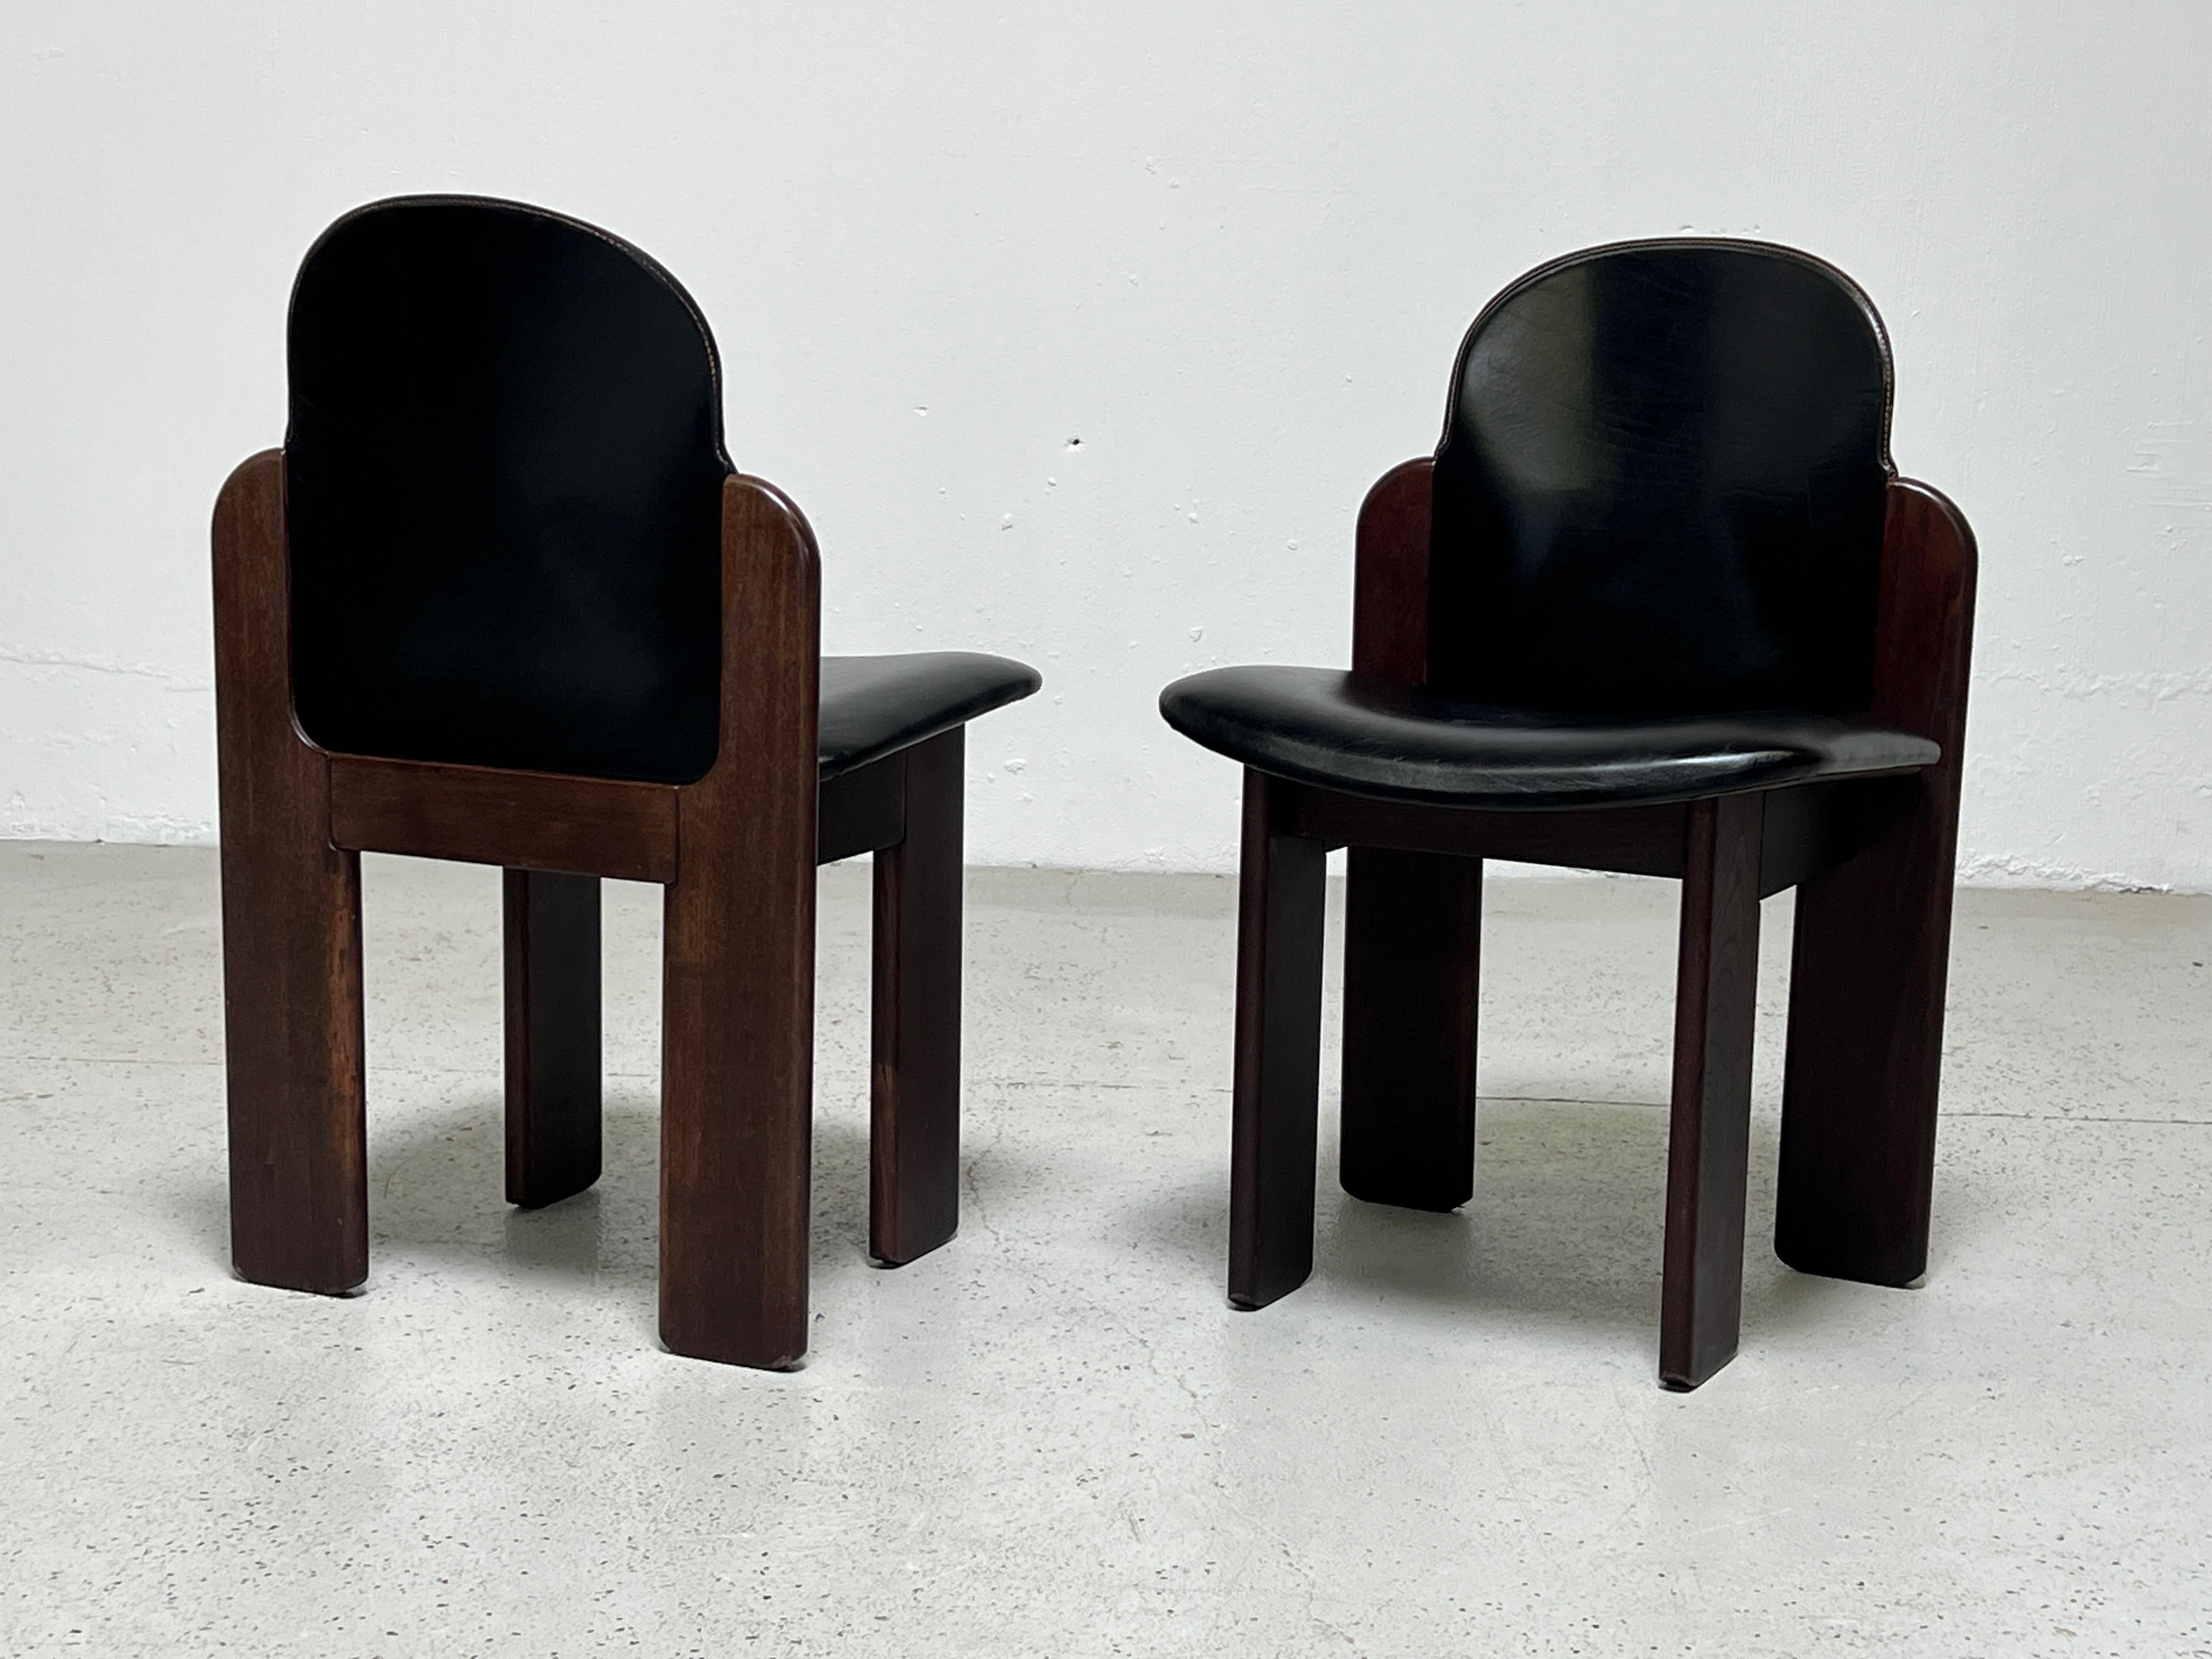 Late 20th Century Four Leather and Walnut Chairs by Silvio Coppola for Bernini